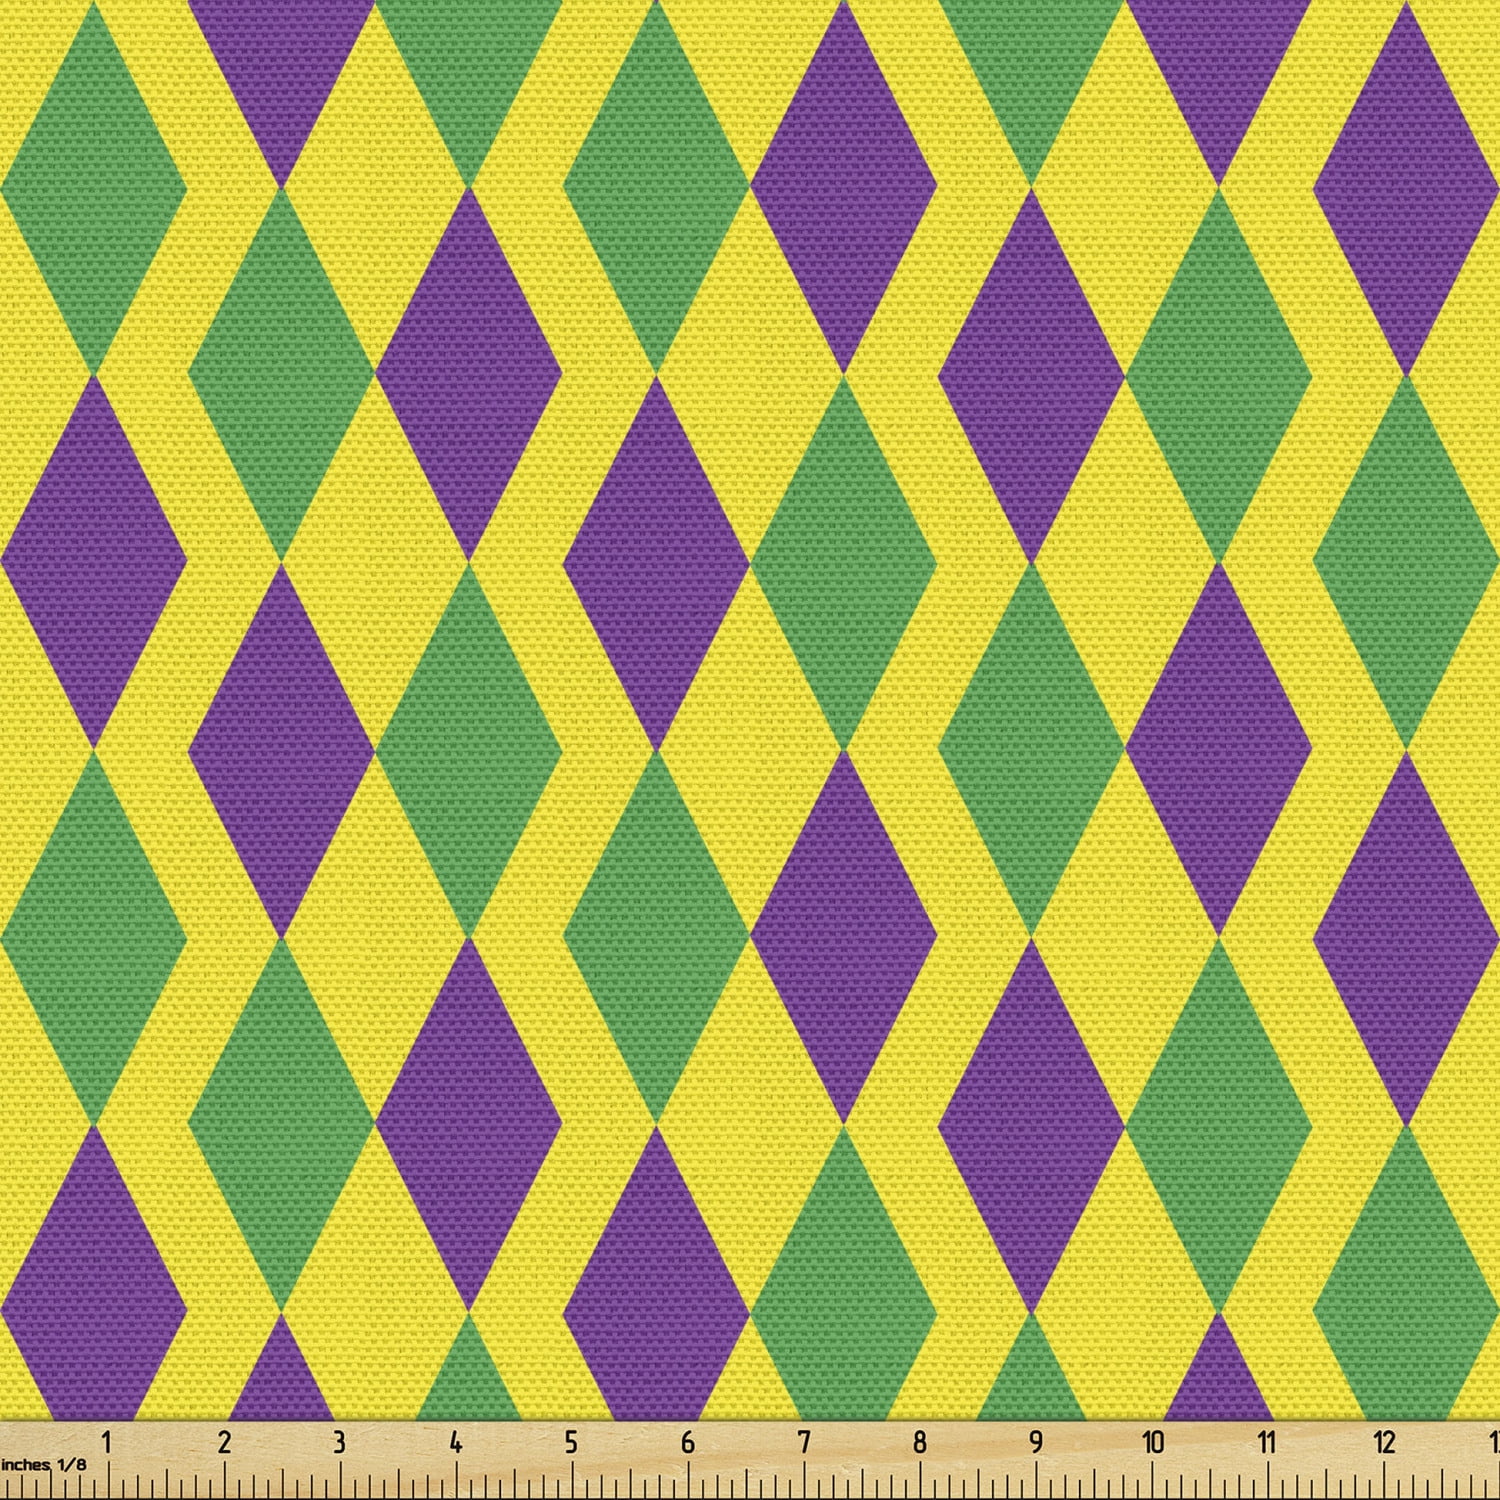 Mardi Gras Feathers Beads Carnival Fabric by Quilting Treasures